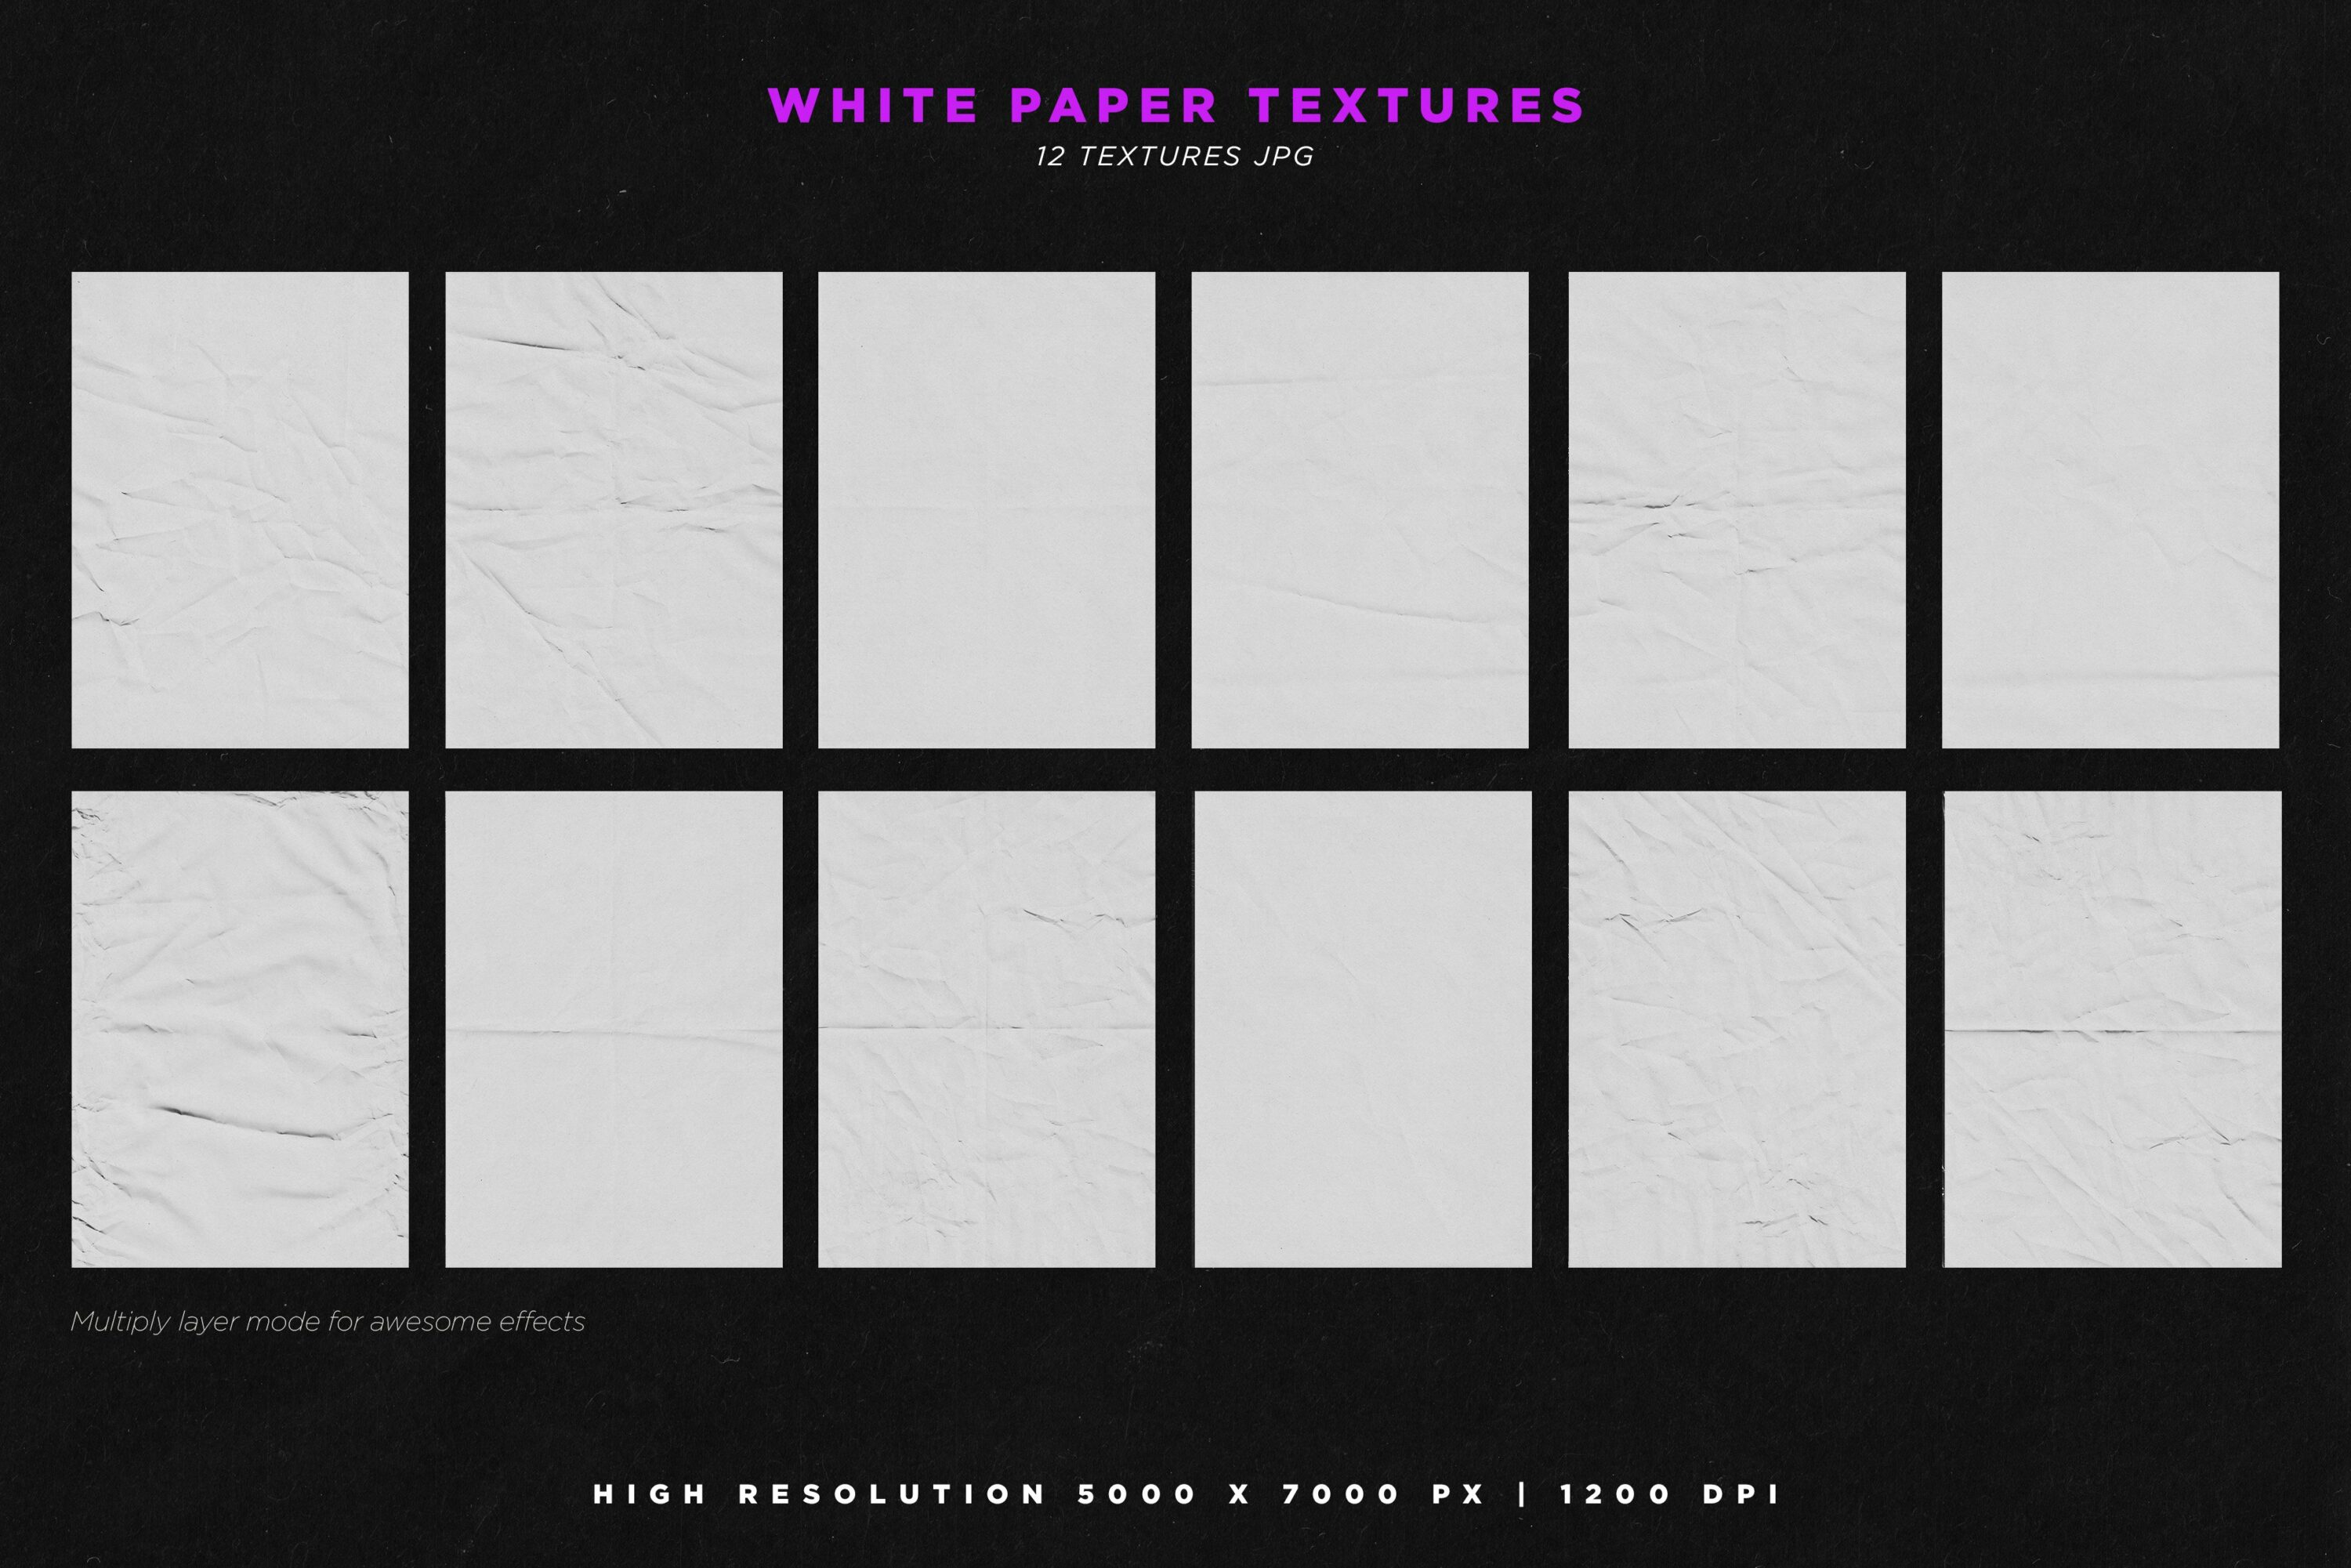 White paper textures.